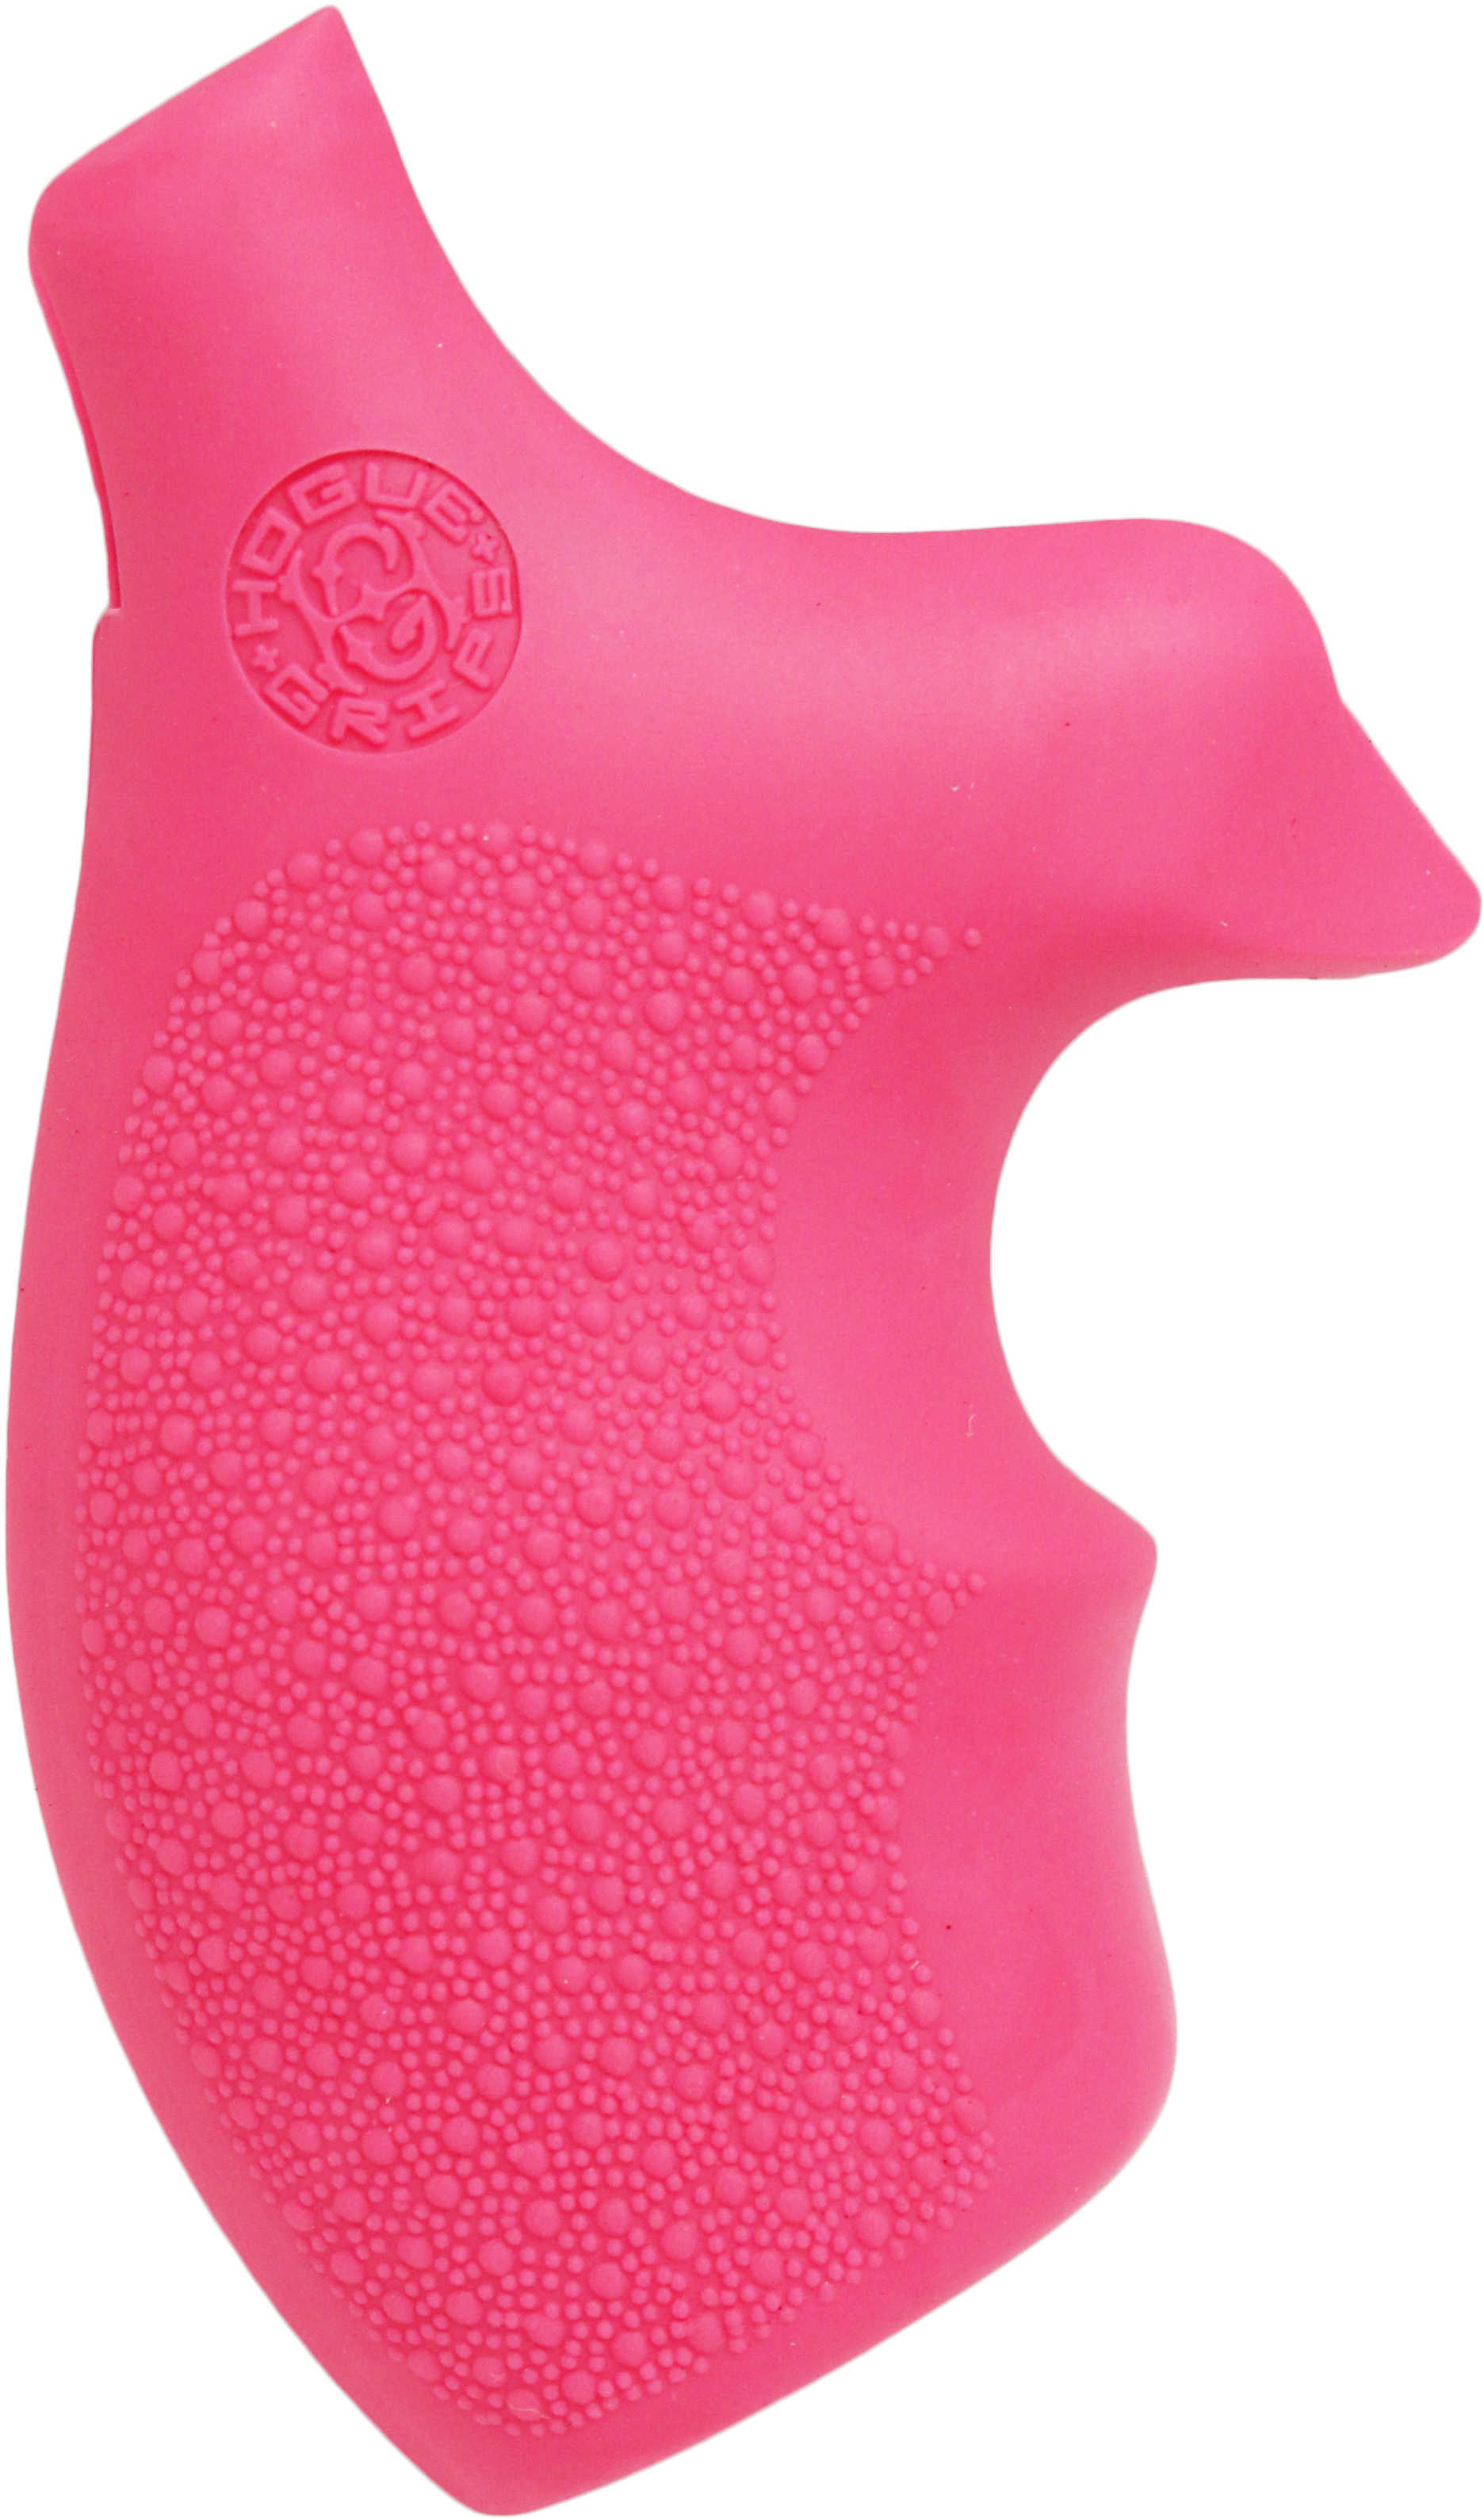 Hogue 61007 Rubber Bantam with Finger Grooves Grip S&W J Frame w/Round Butt Pink